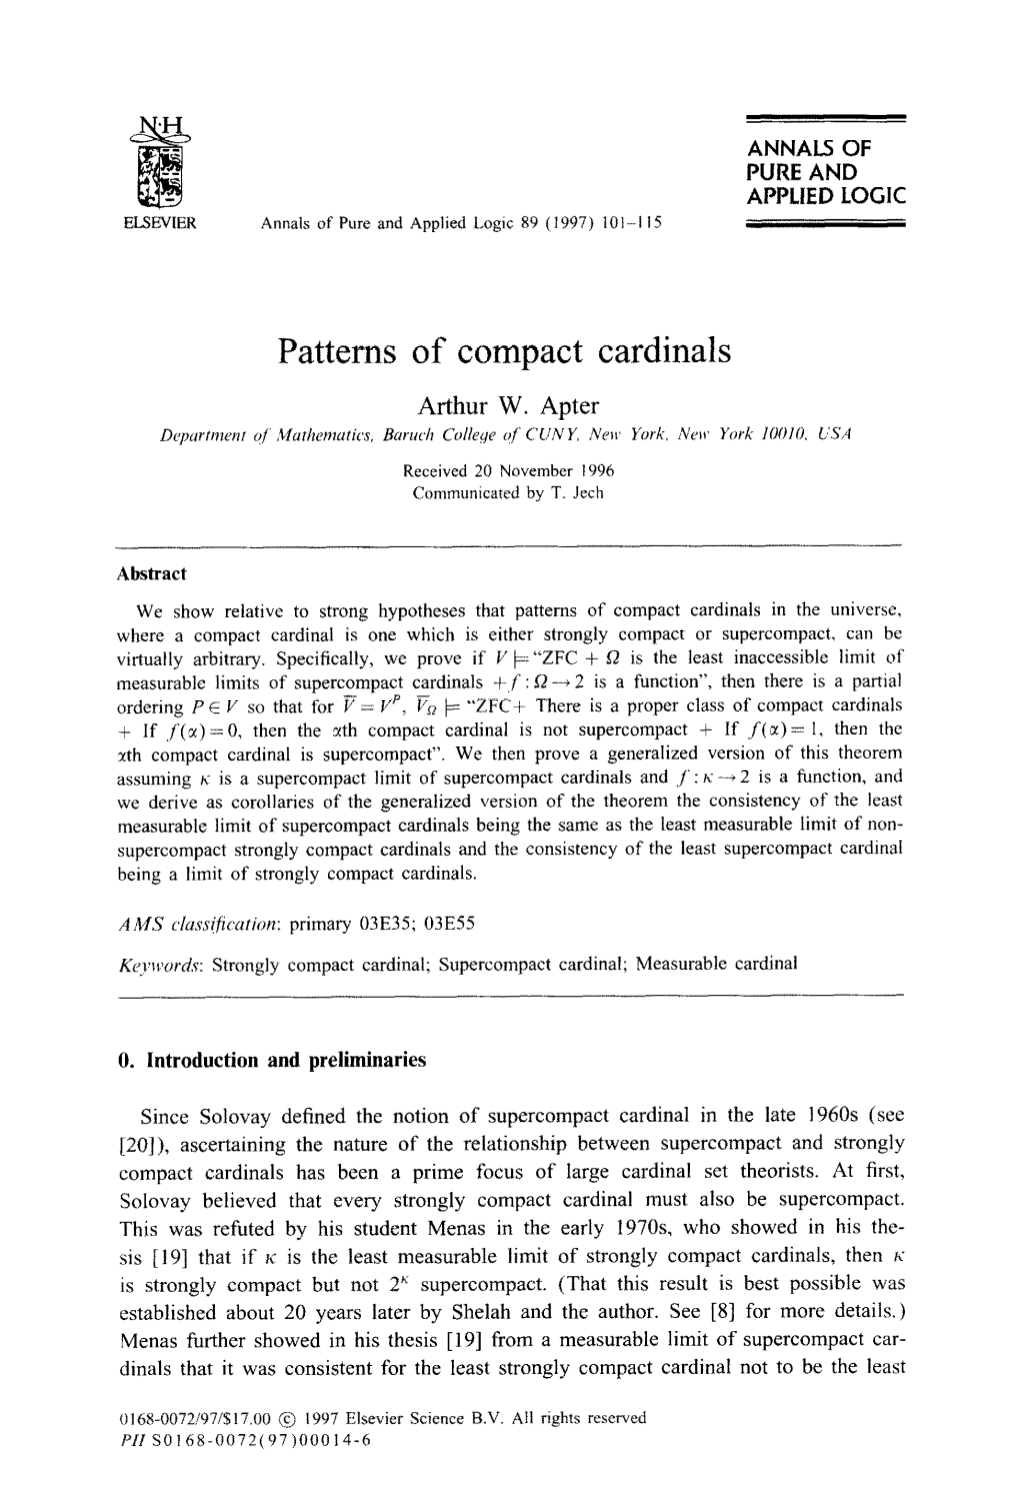 Patterns of Compact Cardinals